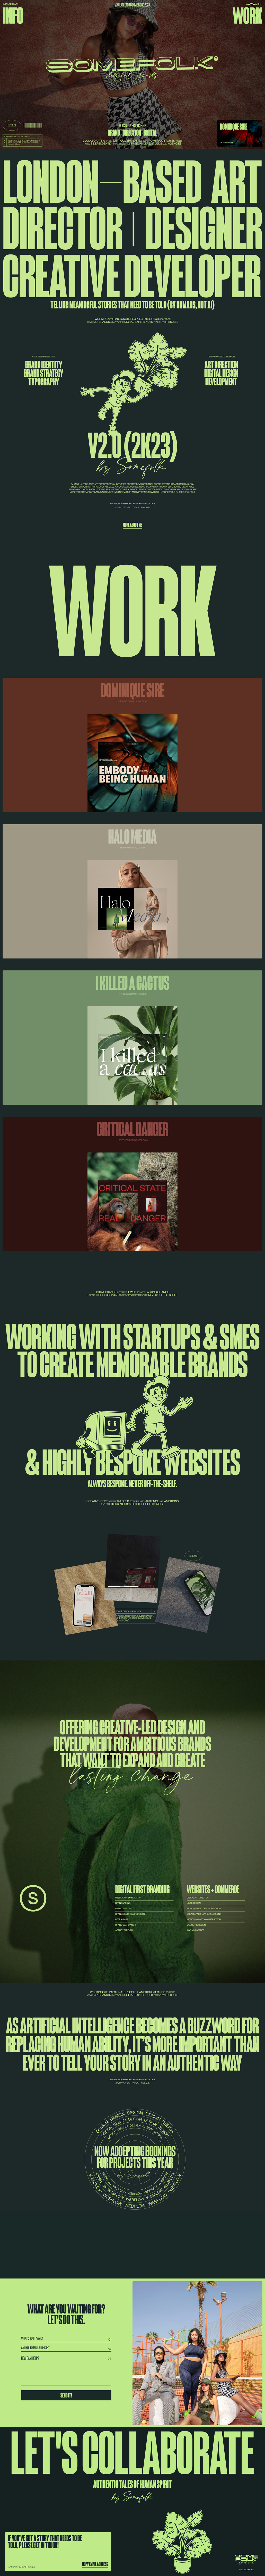 Somefolk Landing Page Example: Somefolk® is the folio of freelance art director, visual designer and creative Webflow developer Jason Harvey. Working with startups and SMEs worldwide to create meaningful brands and digital experiences.